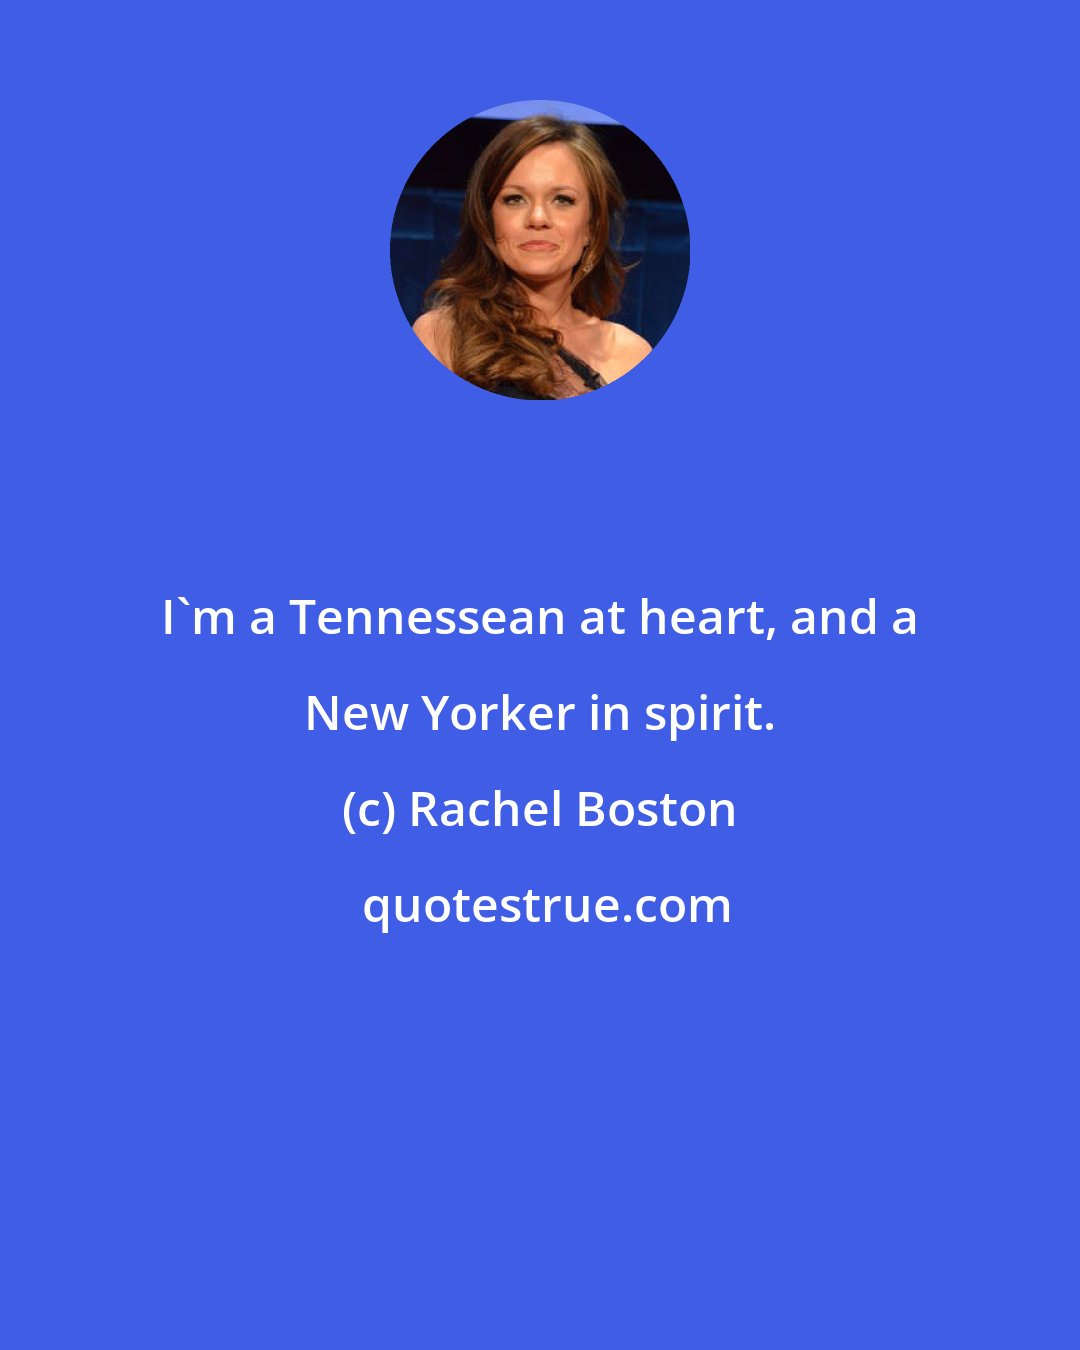 Rachel Boston: I'm a Tennessean at heart, and a New Yorker in spirit.